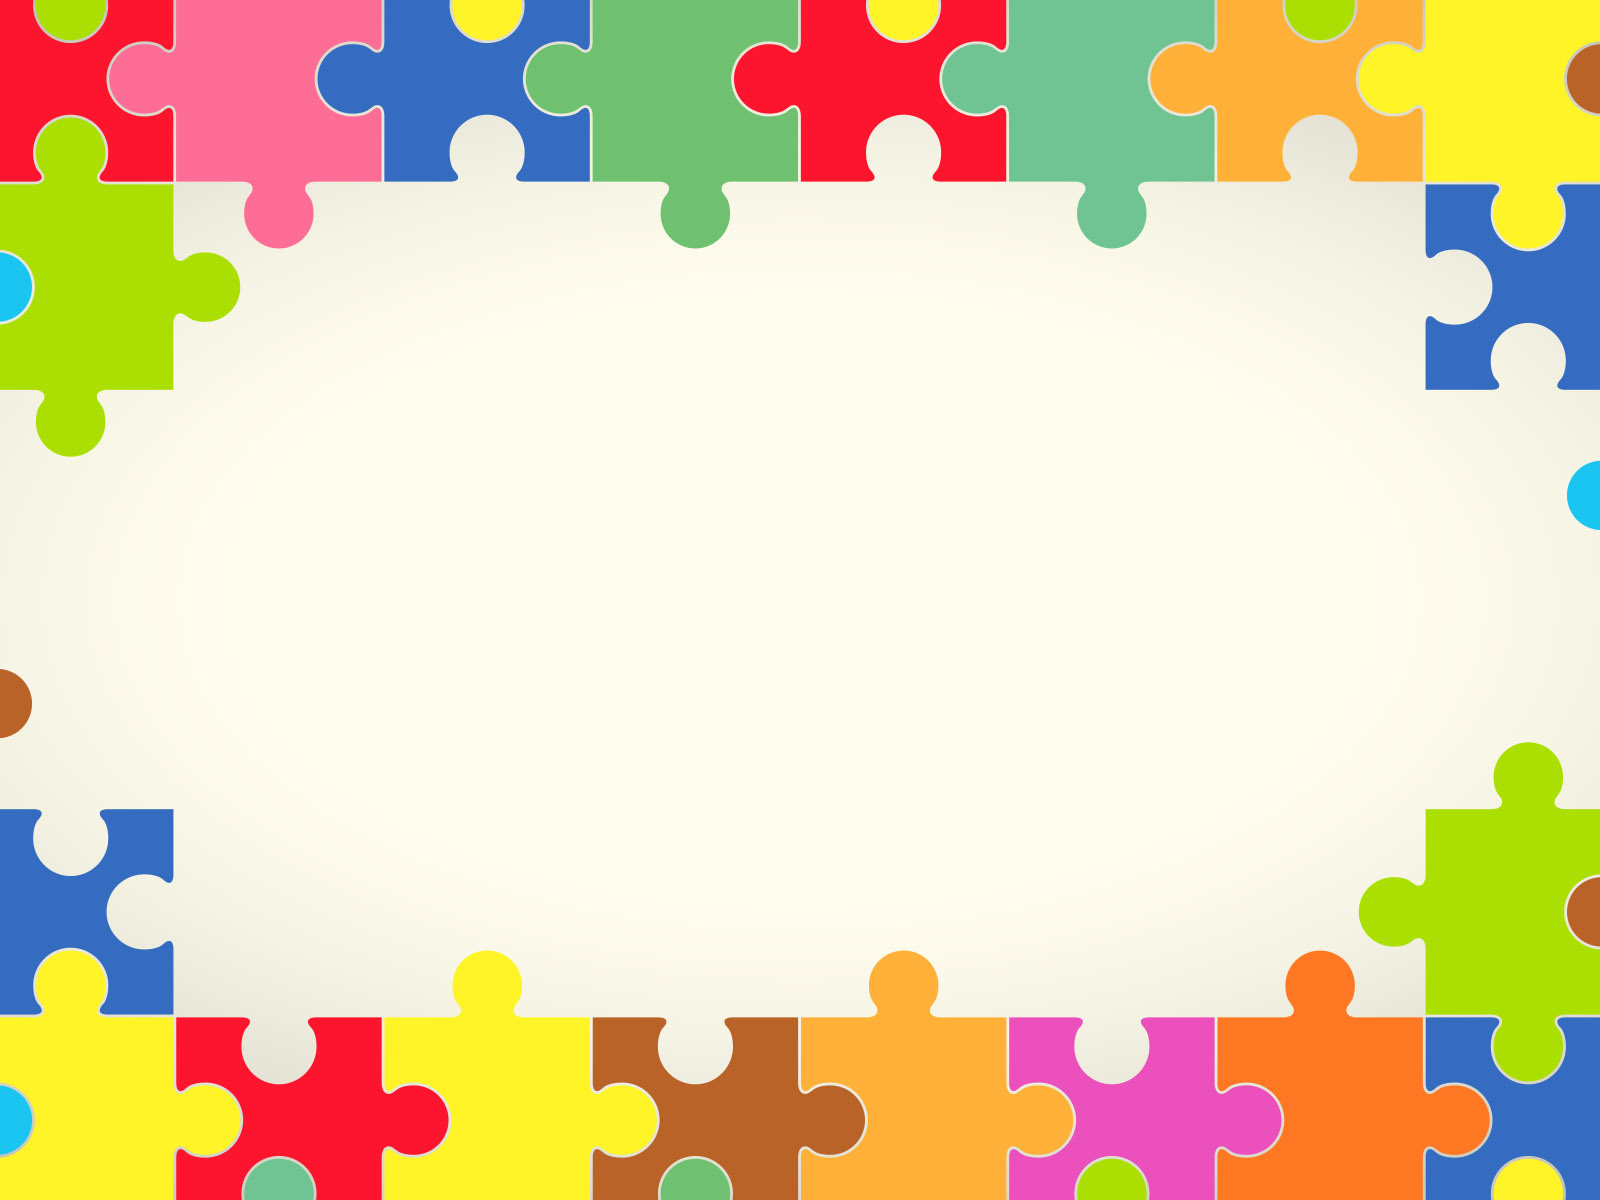 Colourful Puzzles Powerpoint Templates Border Frames Objects